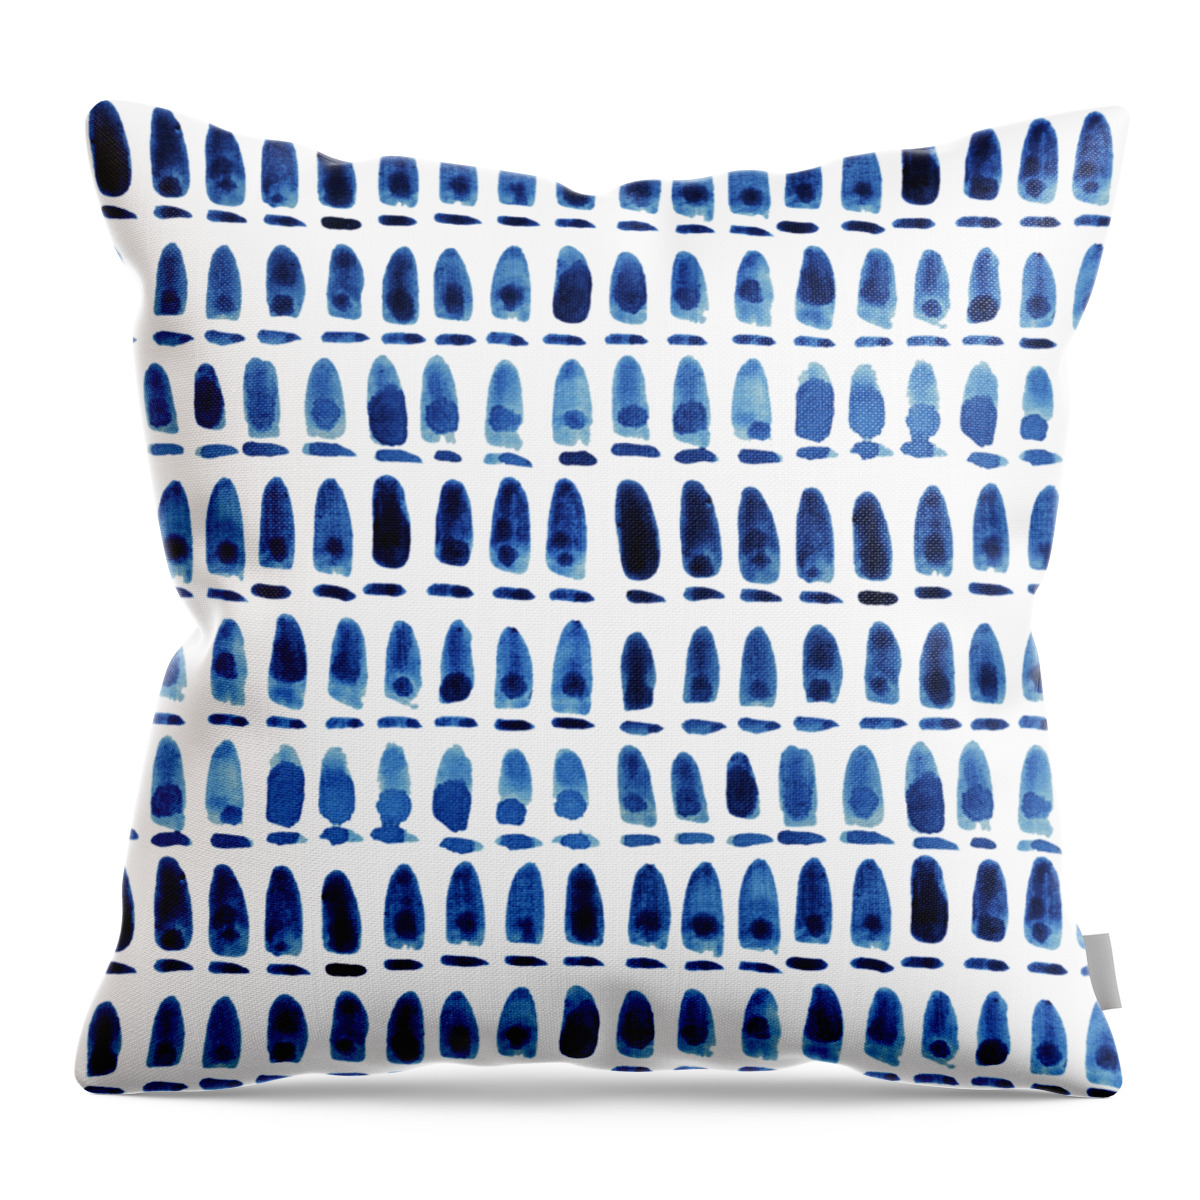 Shibori Throw Pillow featuring the painting Shibori Blue 1 - Patterned Sea Turtle over Indigo Ombre Wash by Audrey Jeanne Roberts